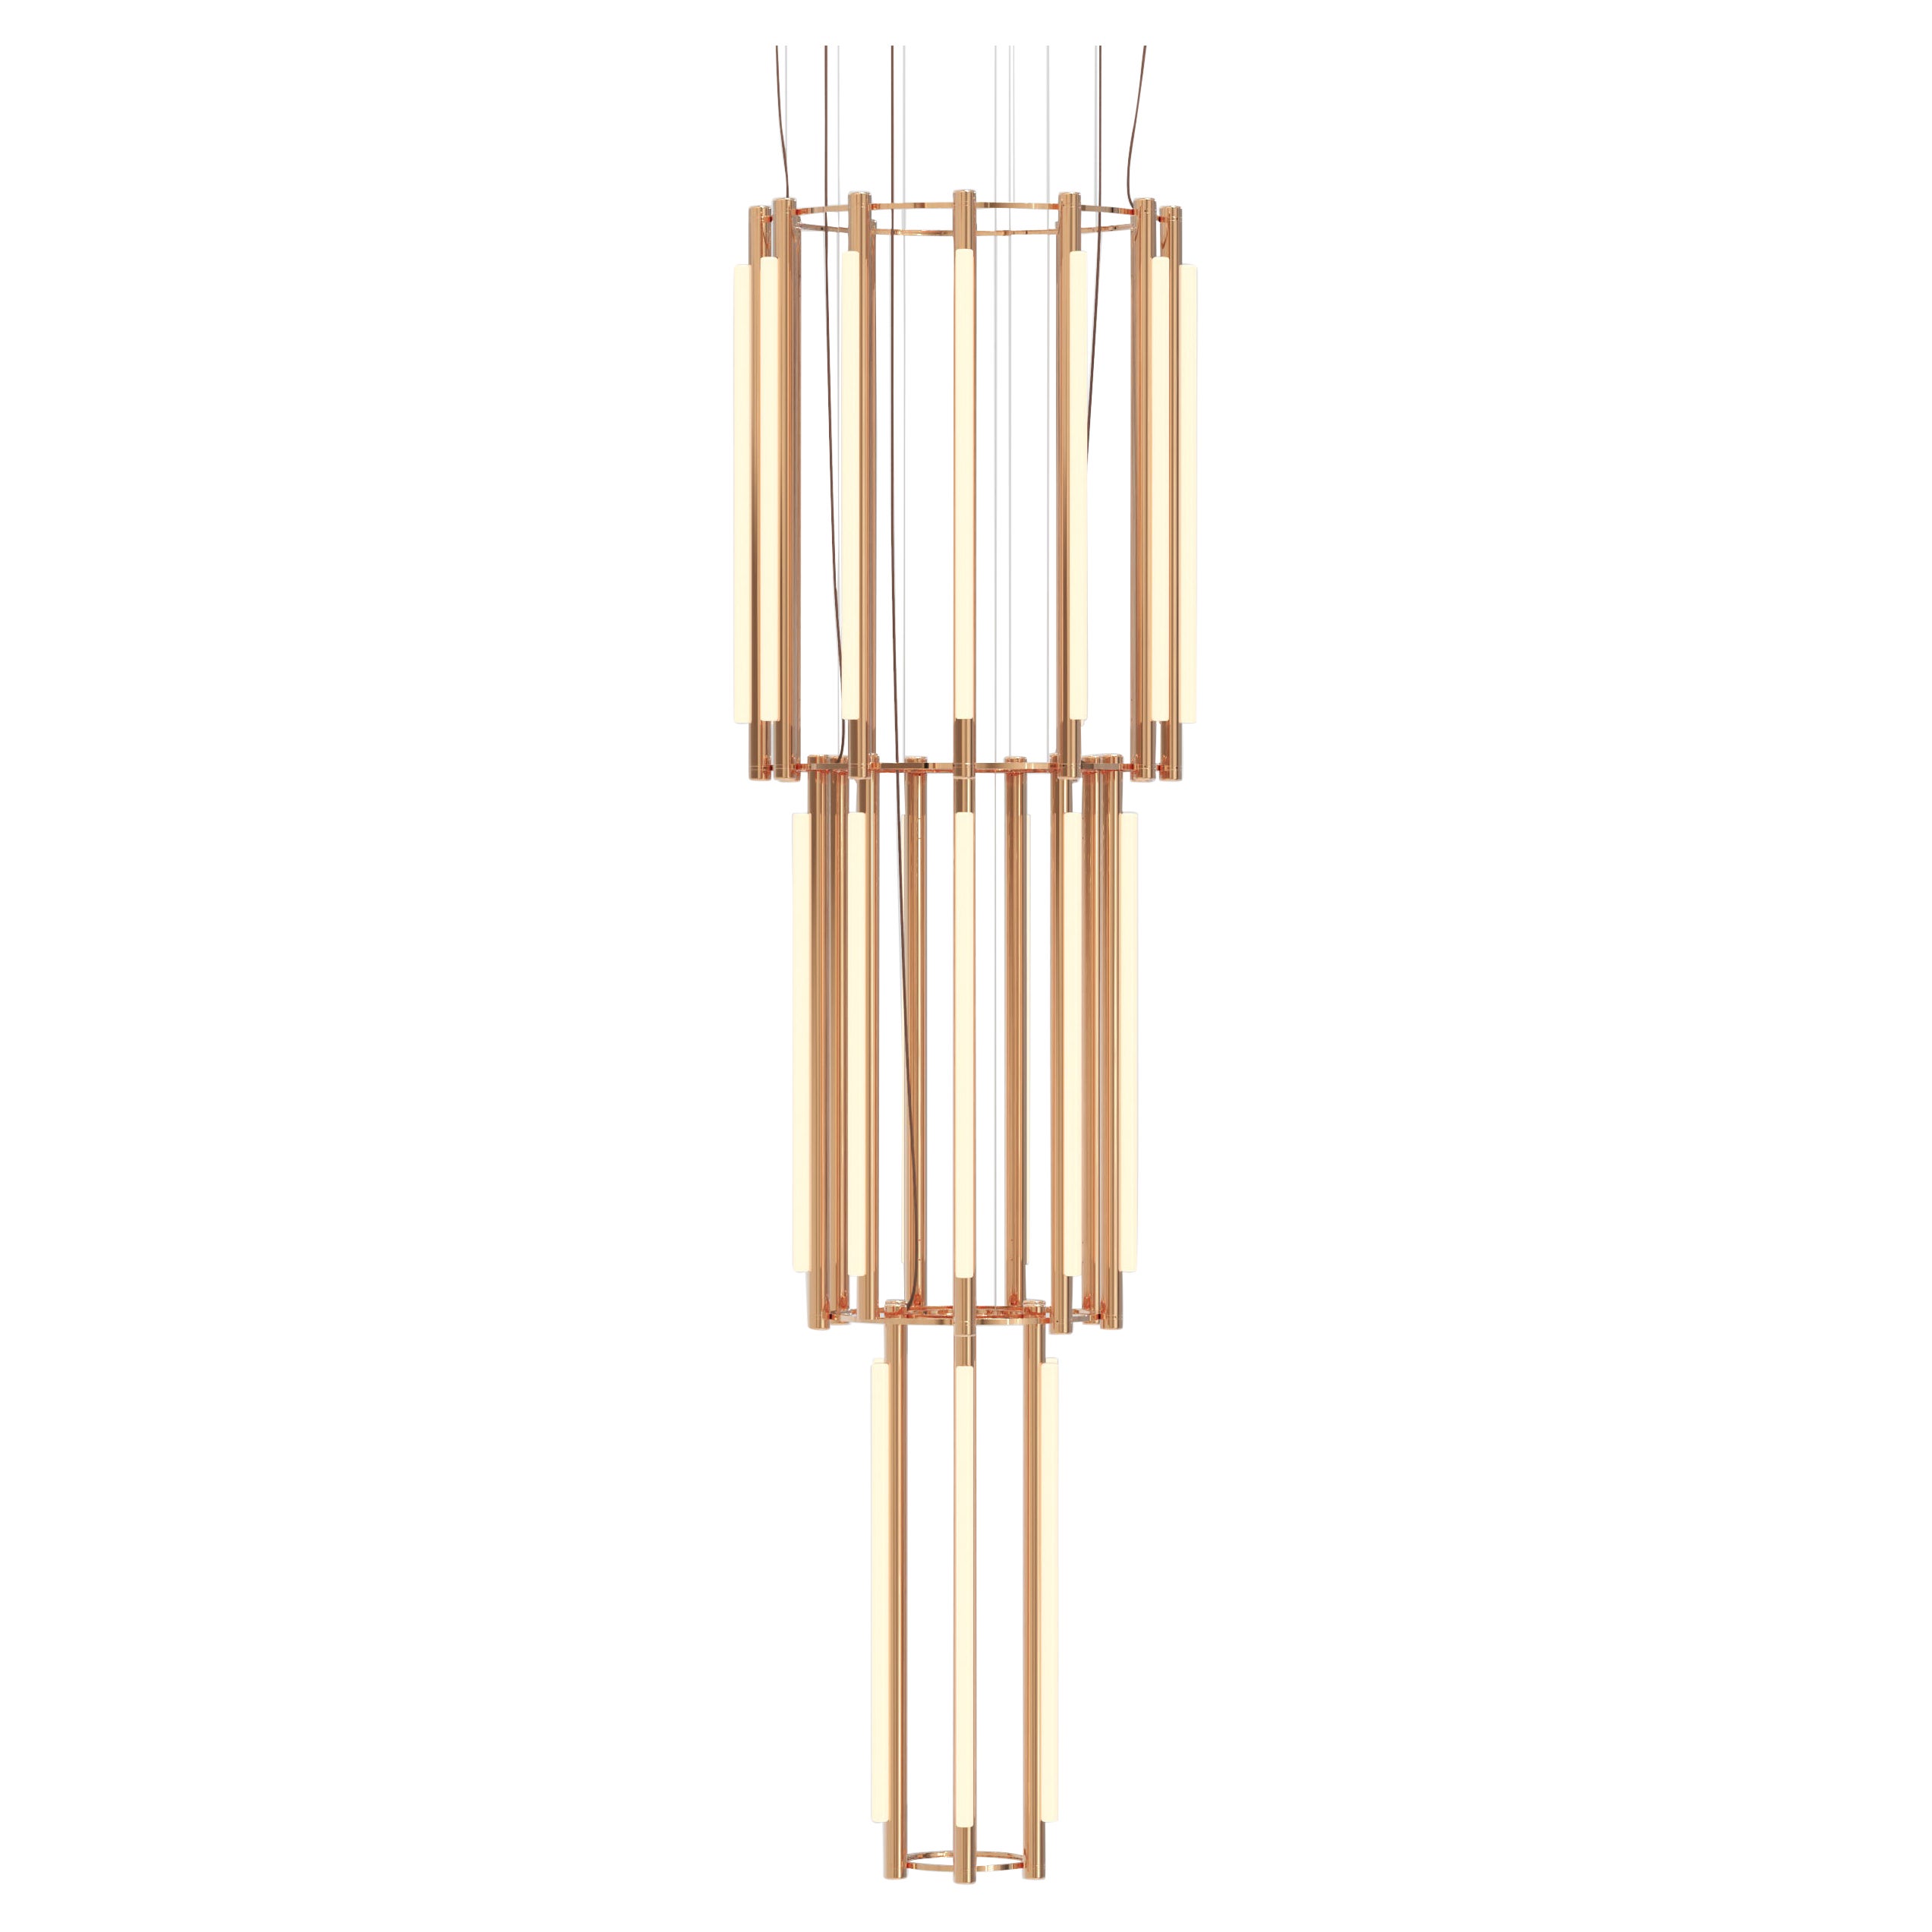 'Pipeline Chandelier 12 - Pendant' by Caine Heintzman for AND Light, Brass